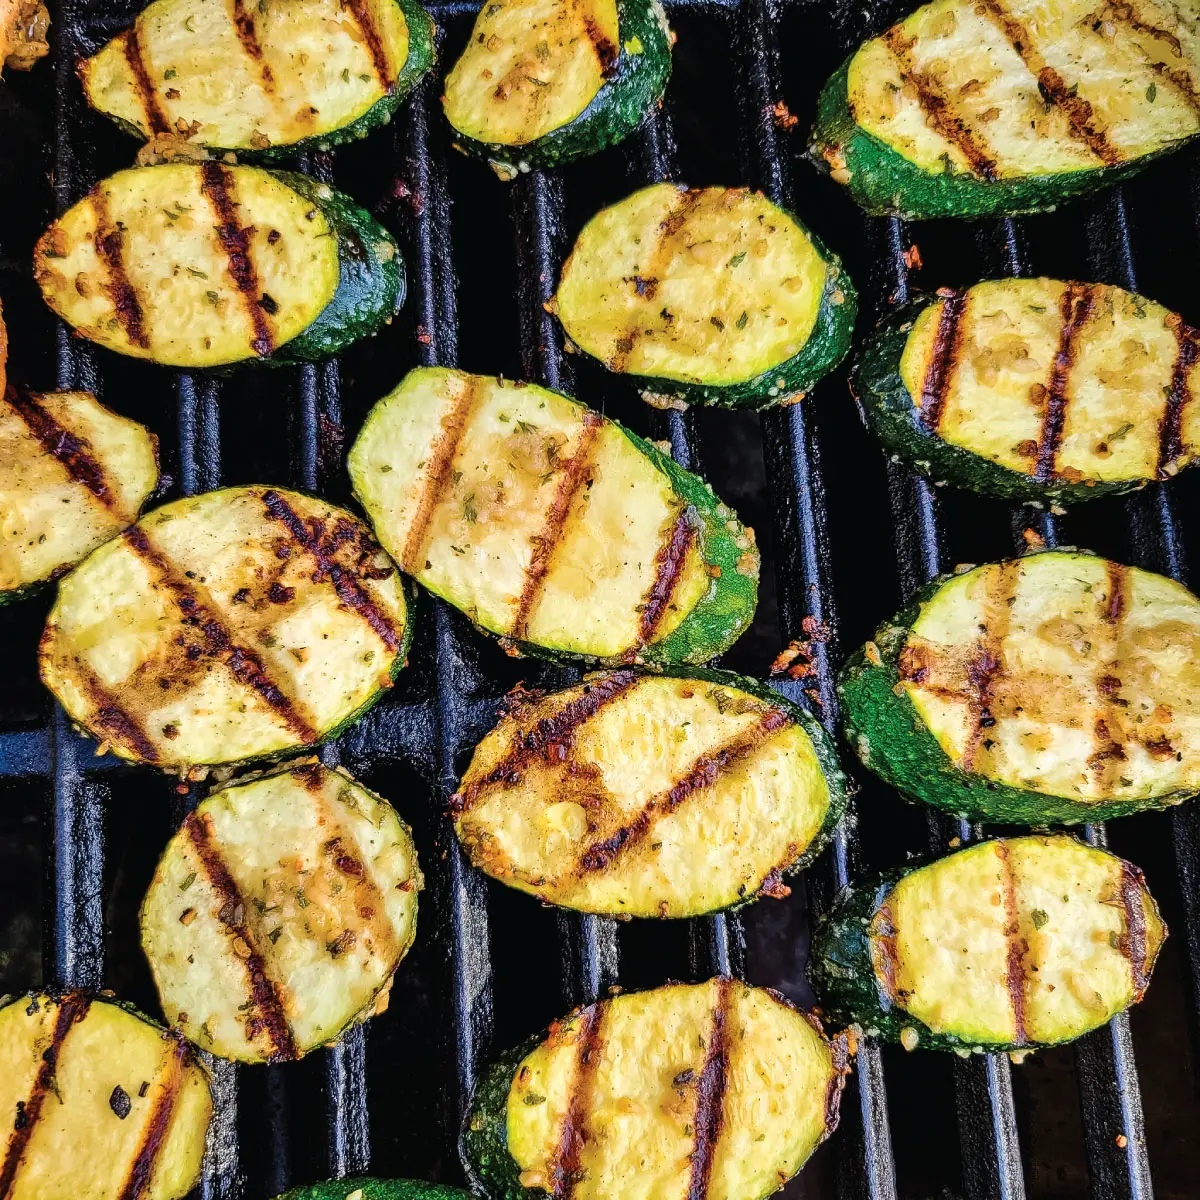 Zucchini slices on the grill after being flipped over once to show the sear marks.